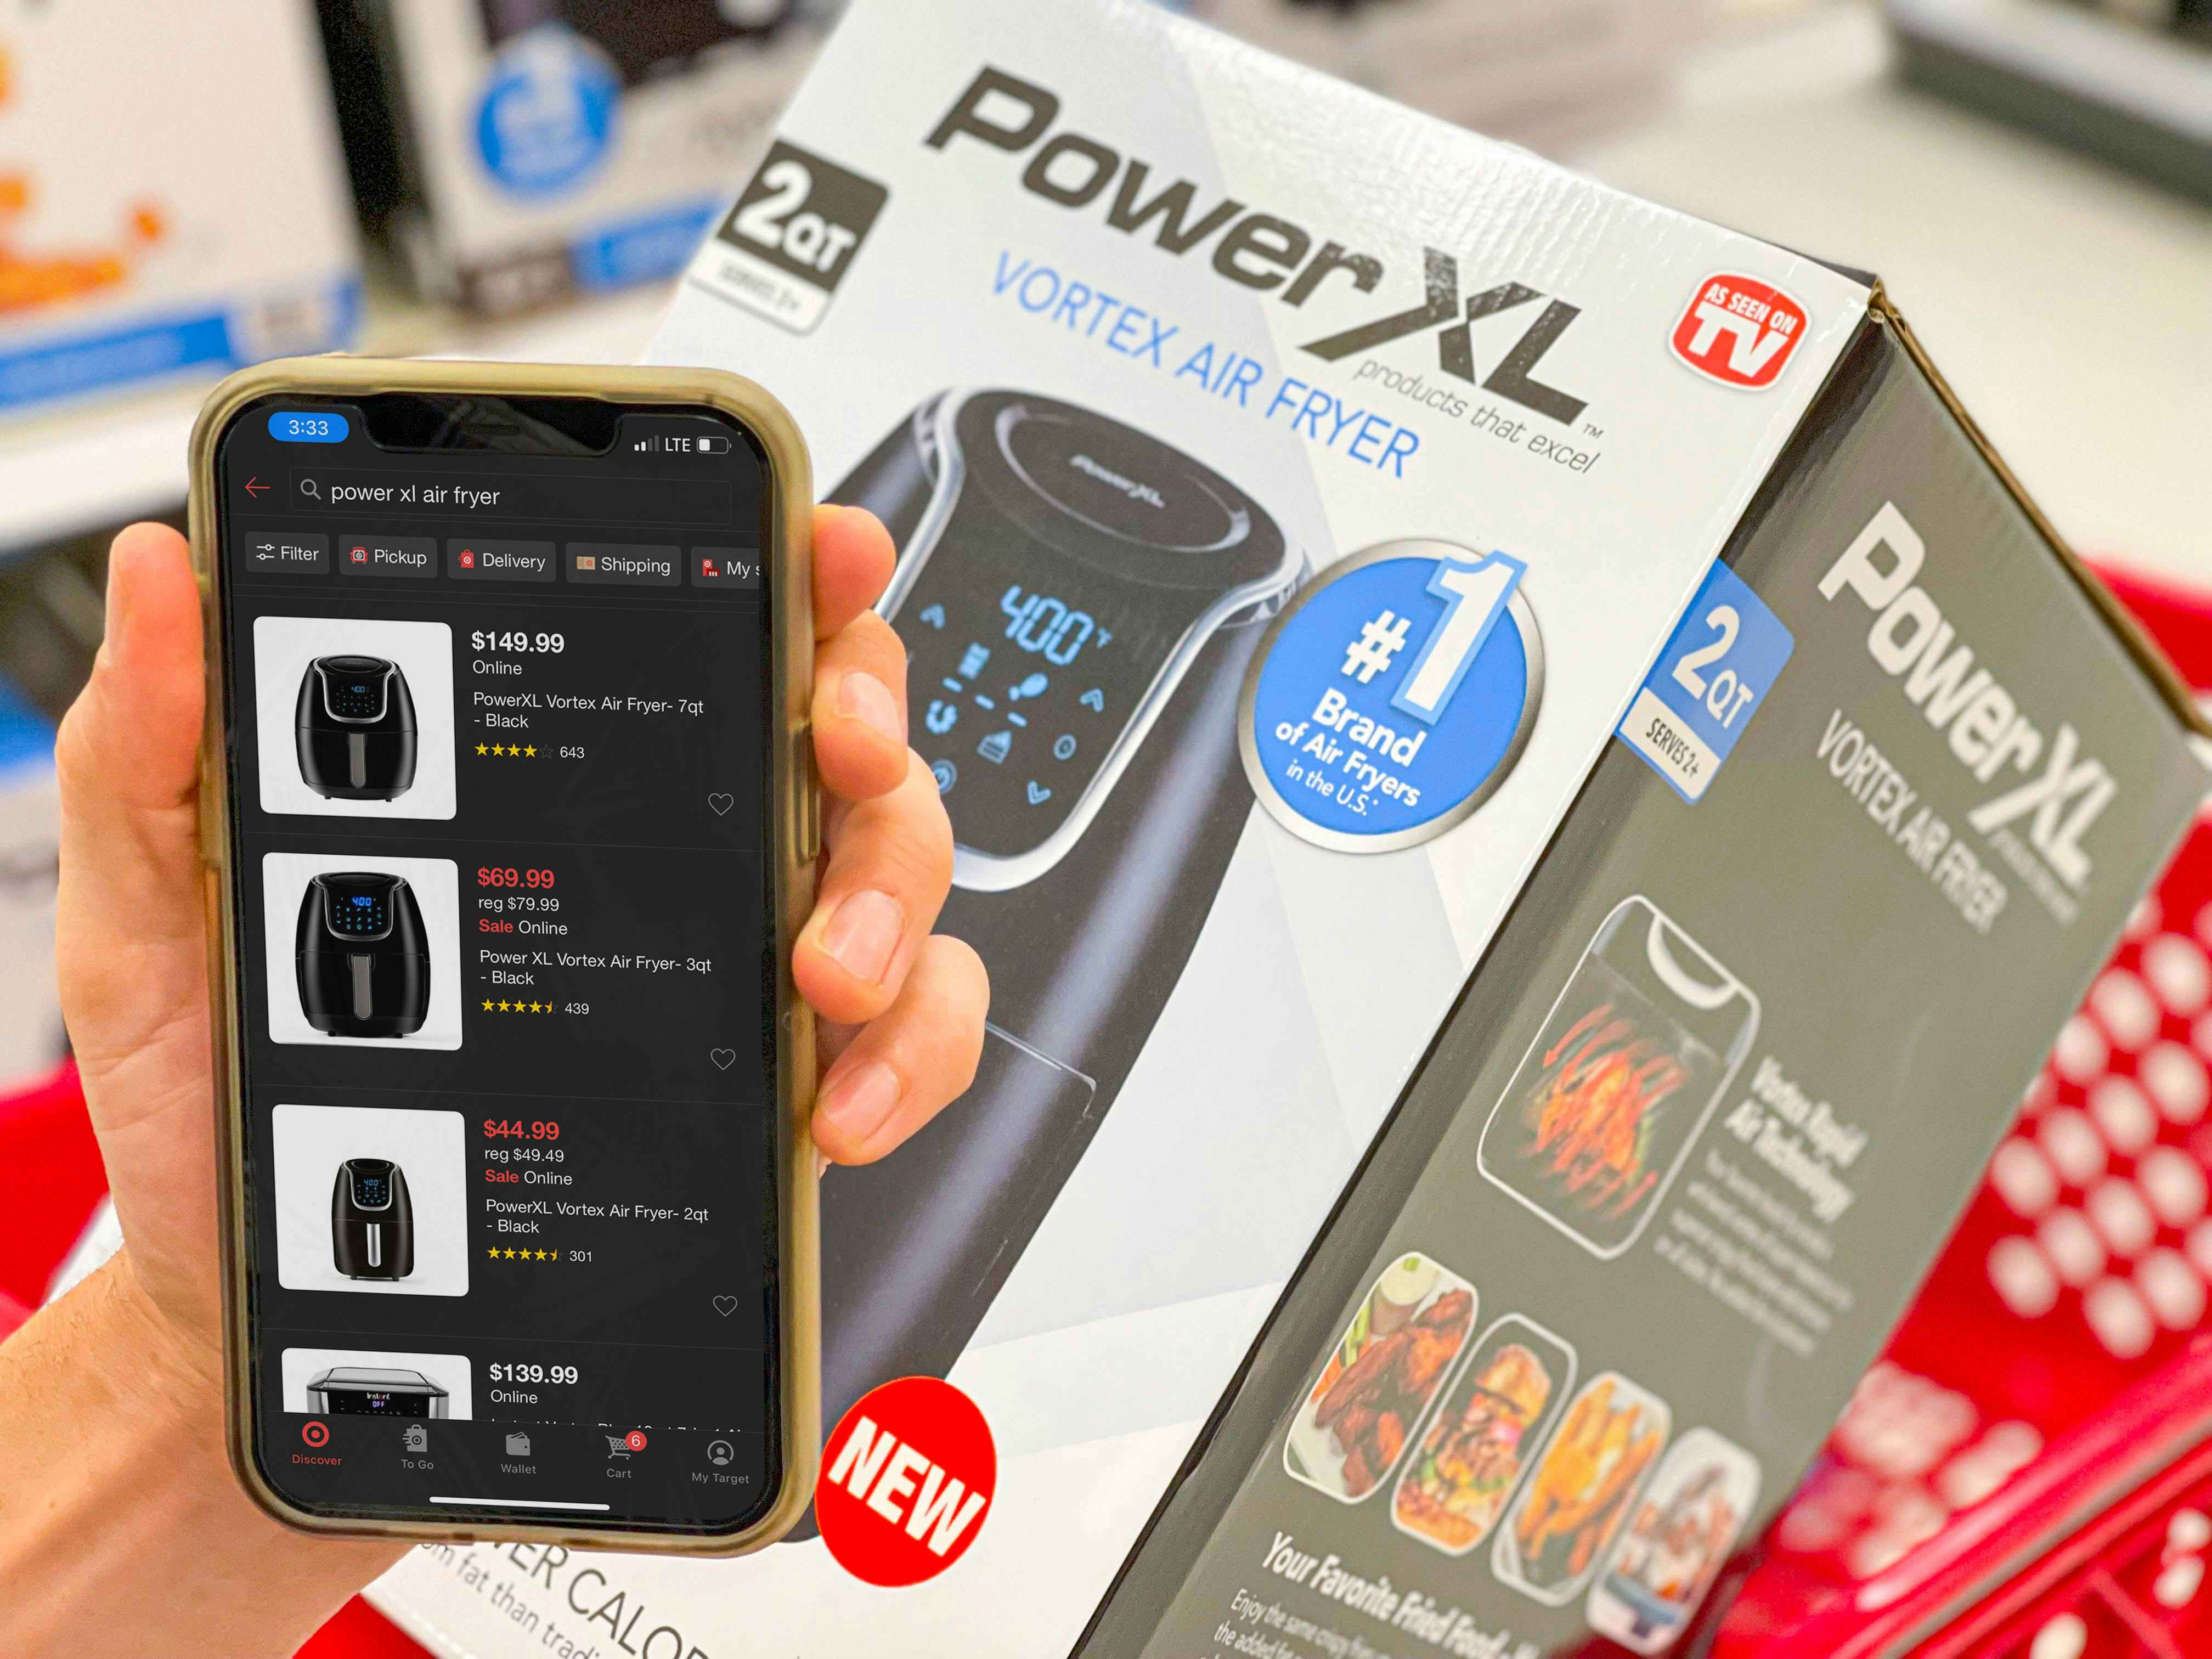 cellphone with target app in front of air fryer to compare prices while holiday shopping